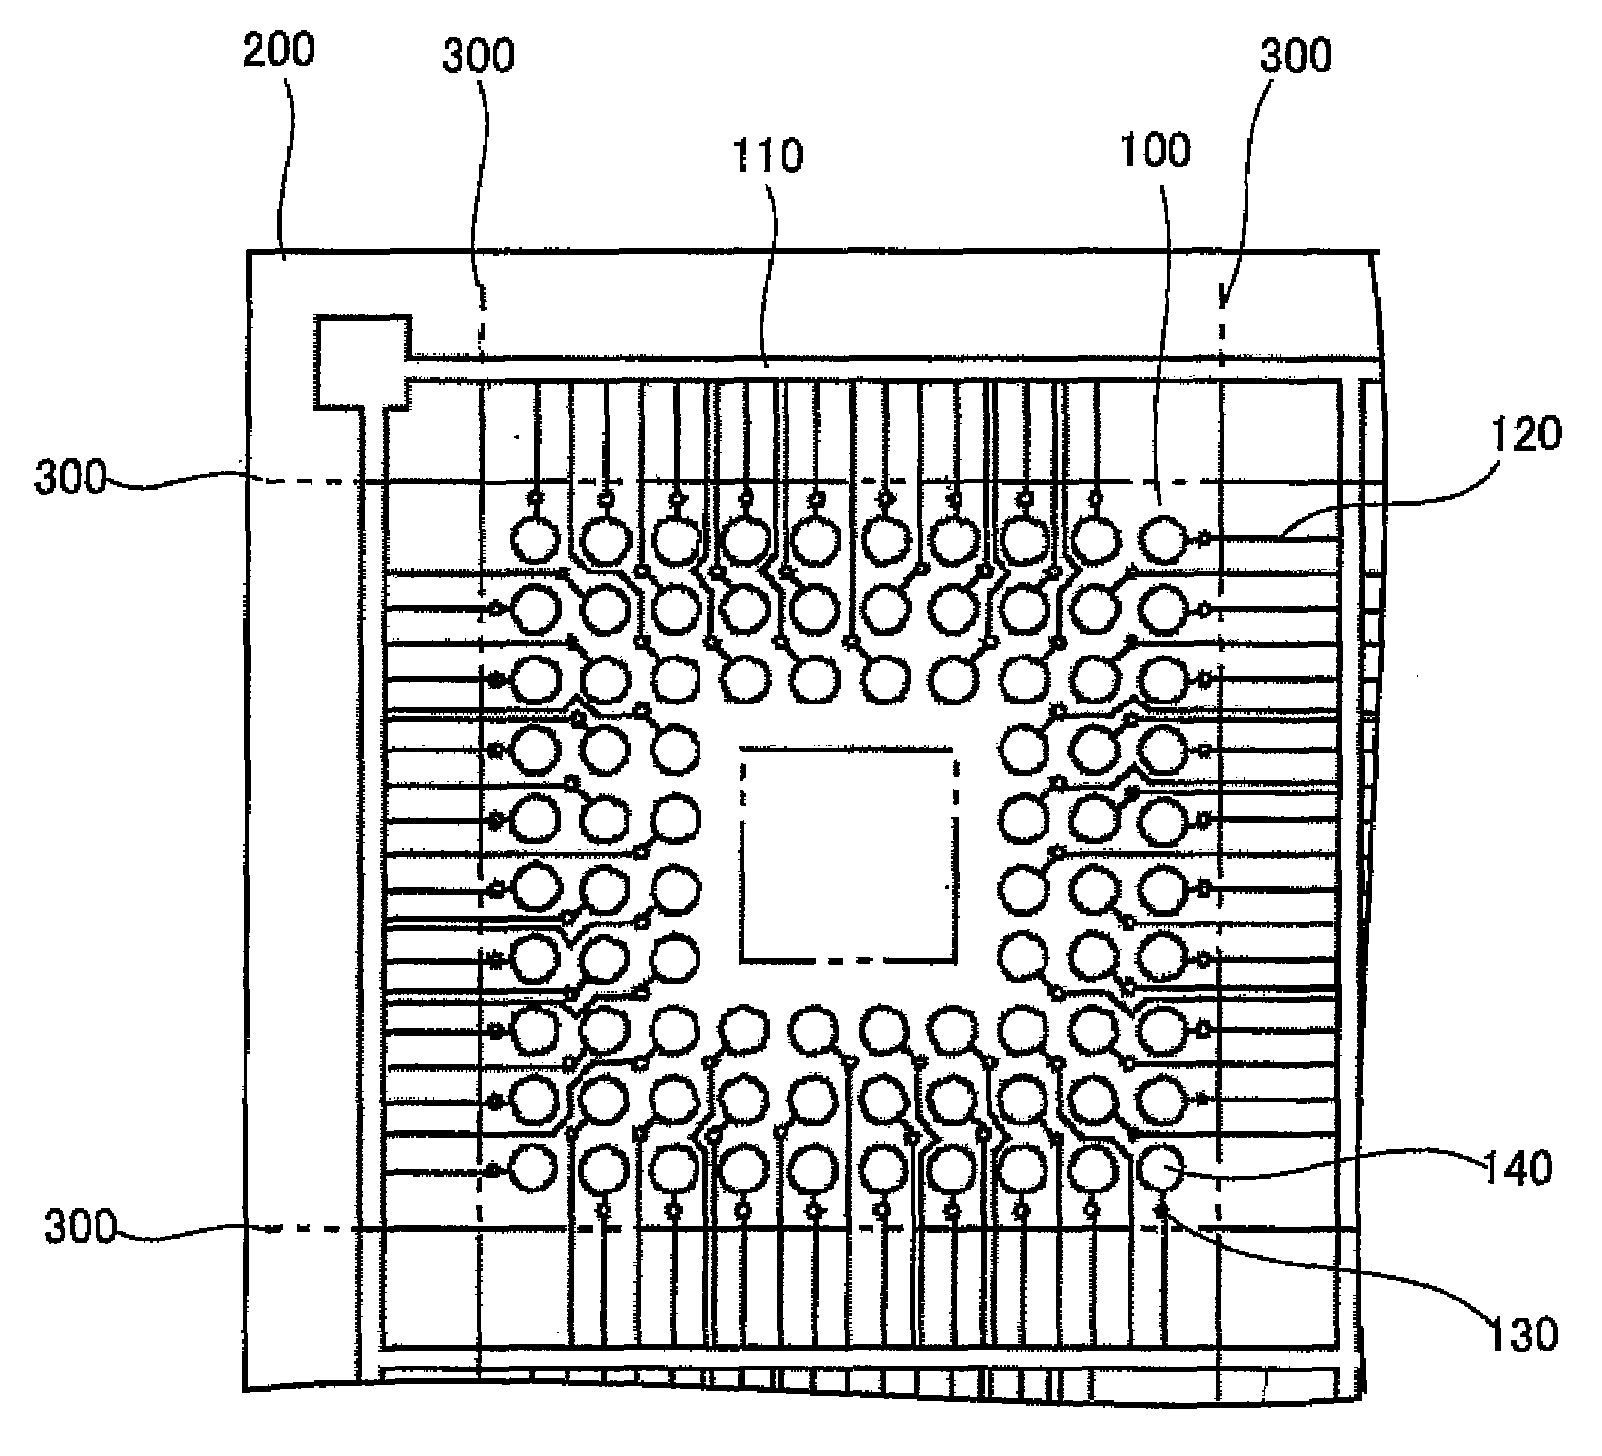 Method for manufacturing printed-circuit board